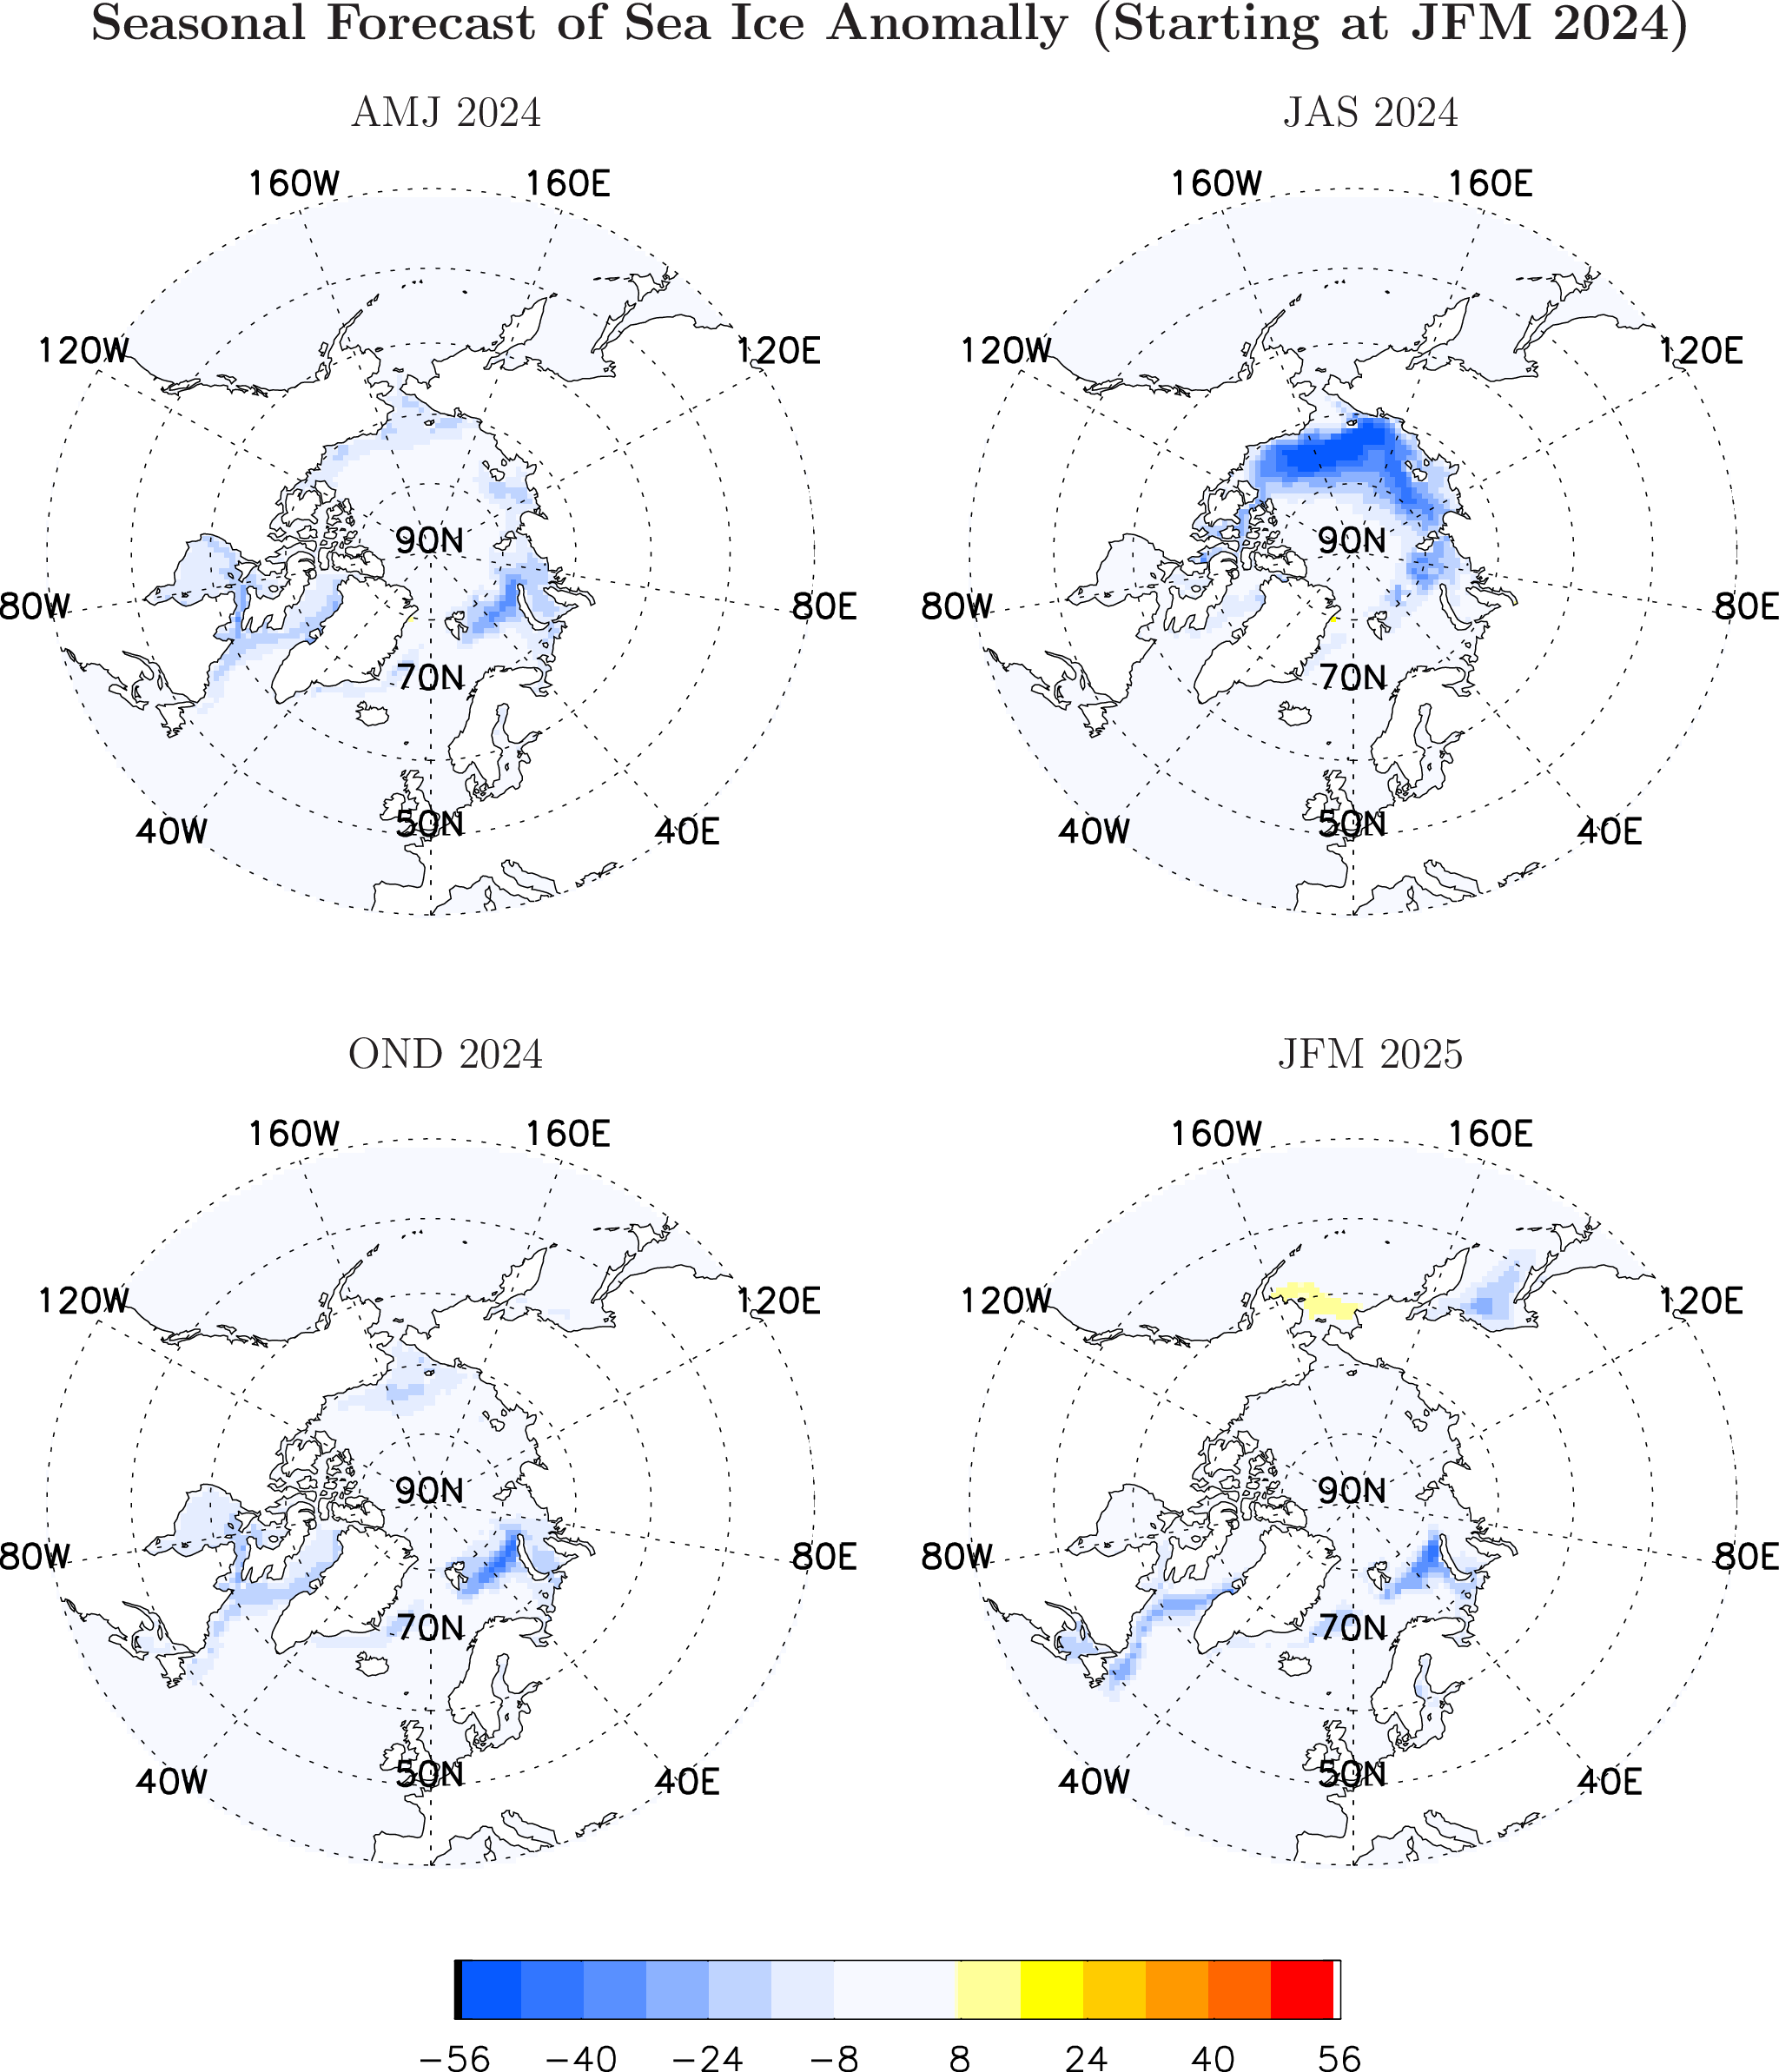 Sea Ice Forecast Concentration Anomaly